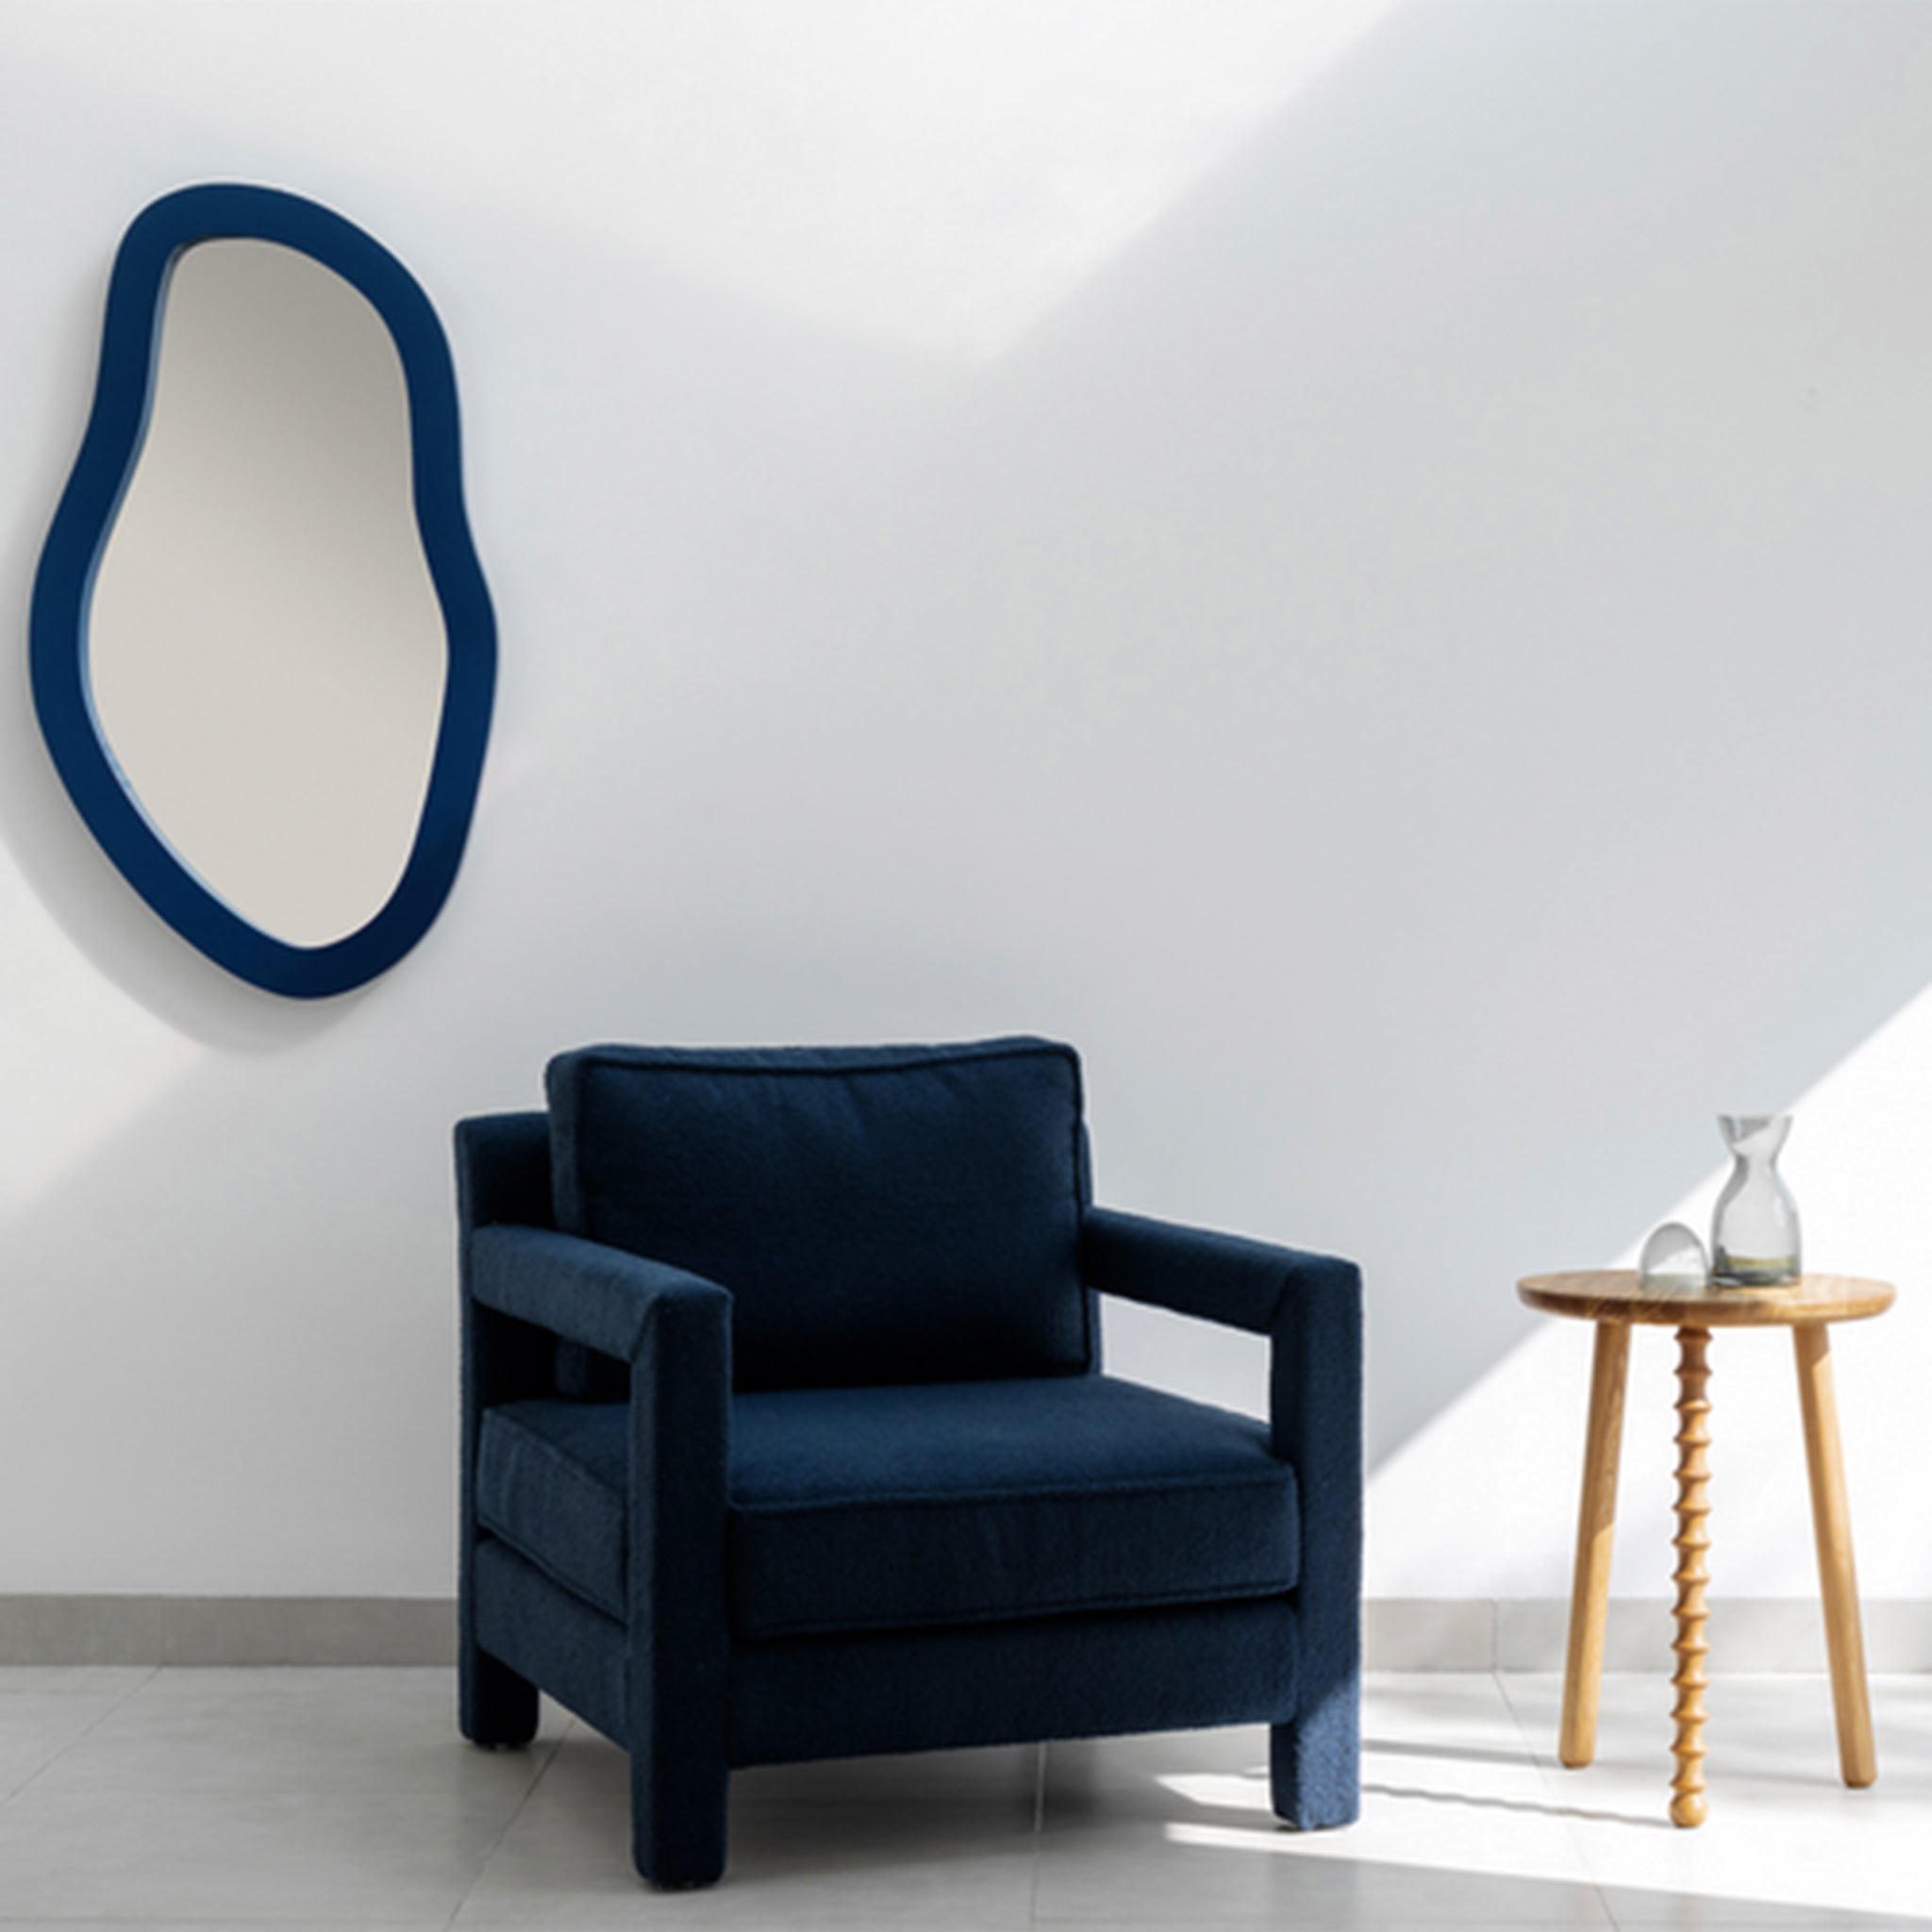 "Modern living room setup featuring The Parsons Accent Chair with deep blue upholstery, a uniquely shaped wall mirror, and a wooden side table with a glass carafe and cup."